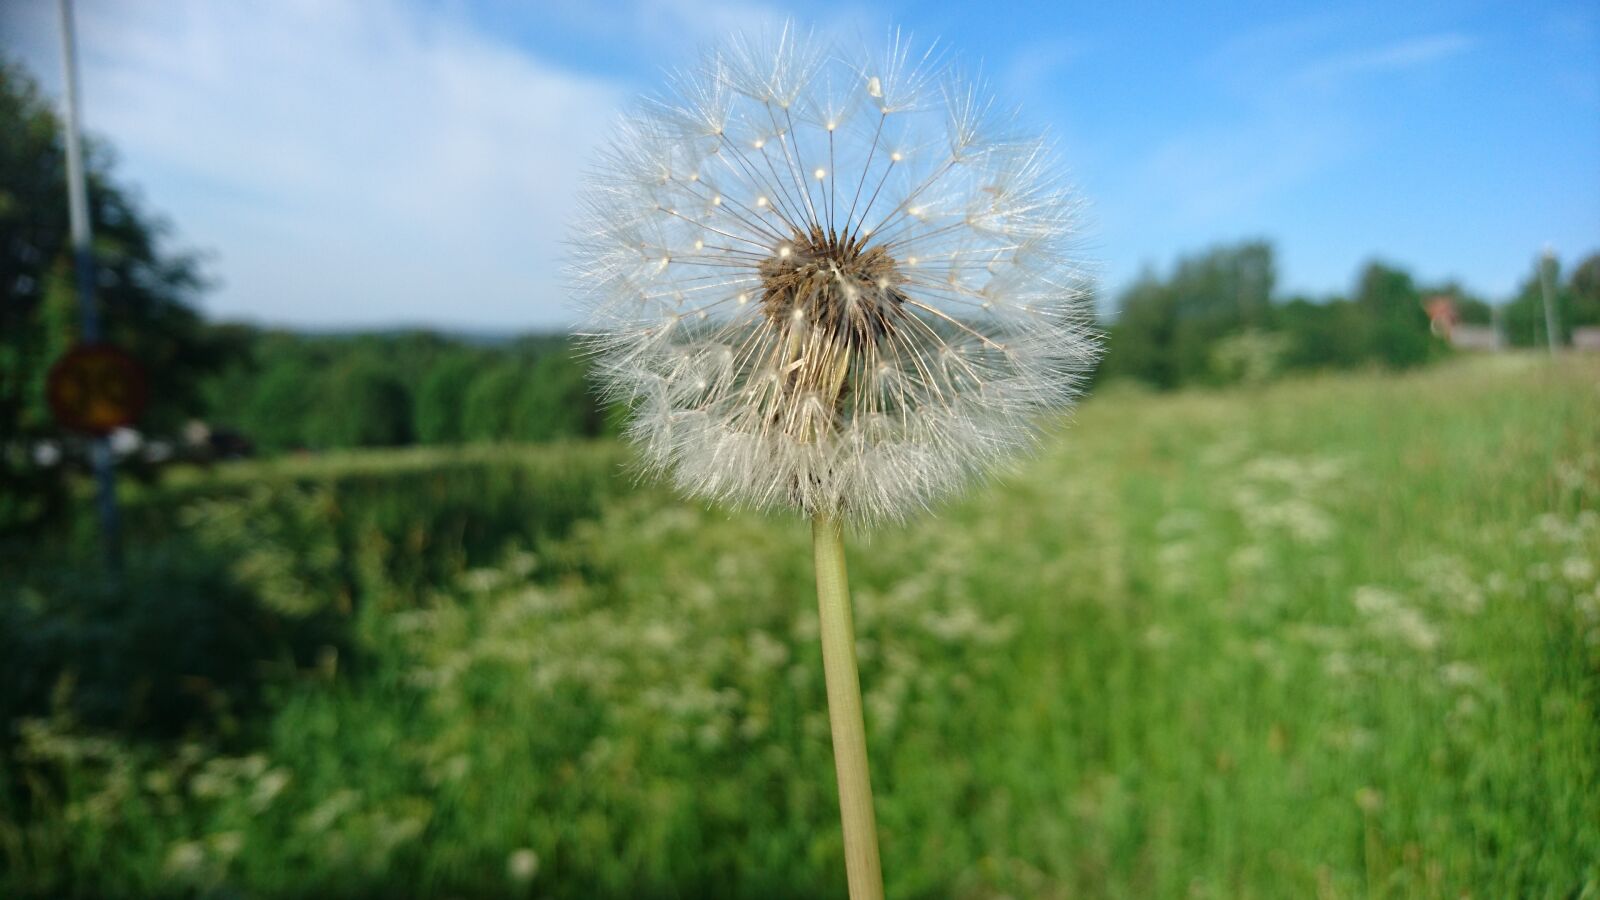 Sony Xperia Z5 Compact sample photo. Flower, summer, dandelion photography